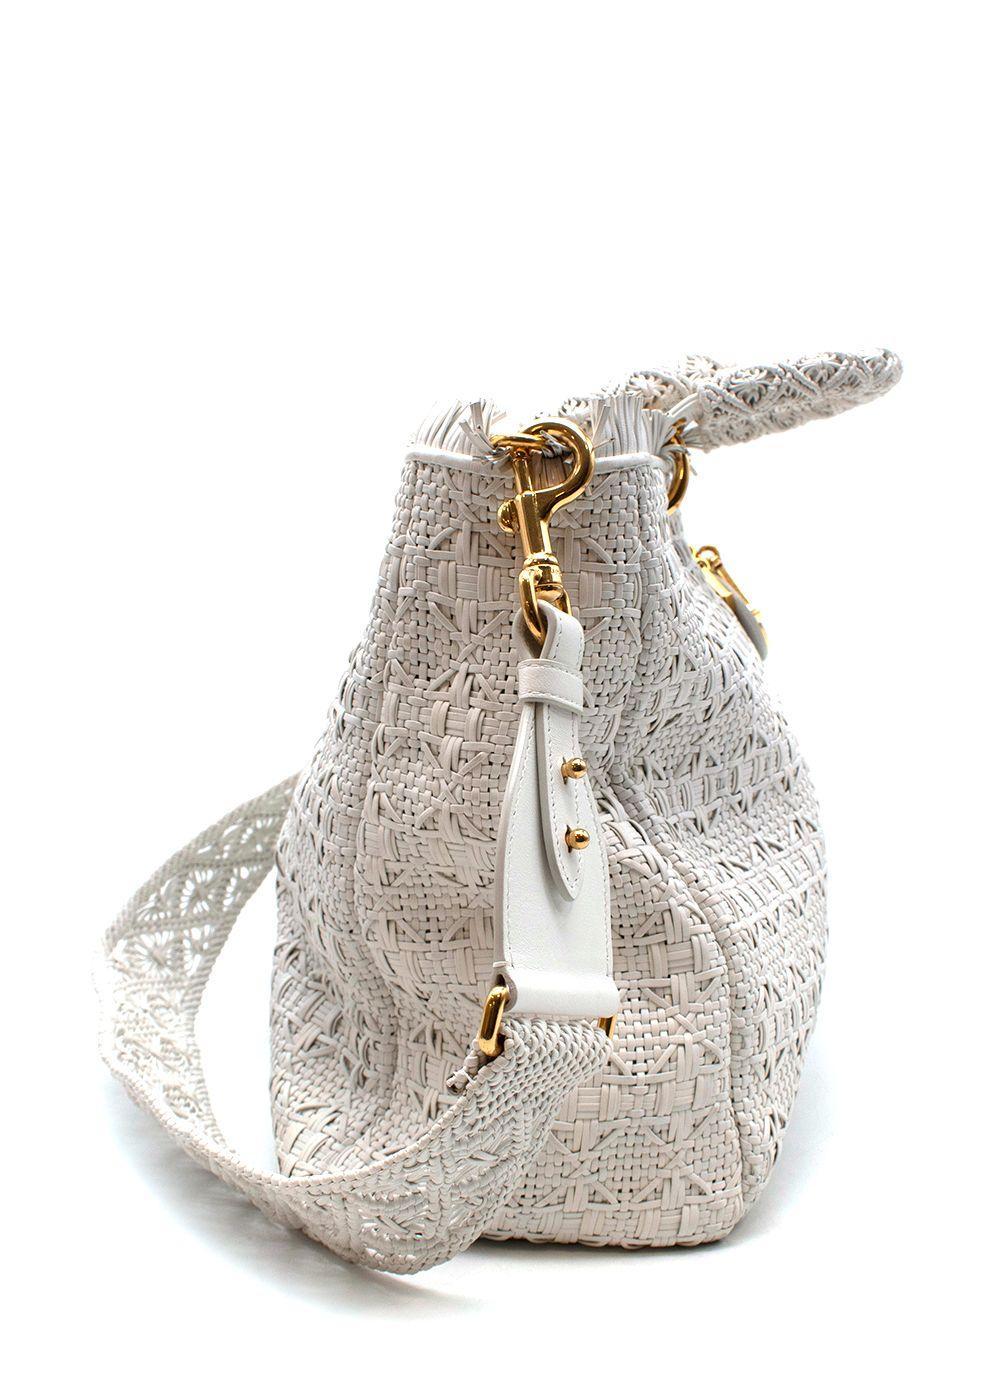 Dior Lady Dior White Woven Leather Bag  2